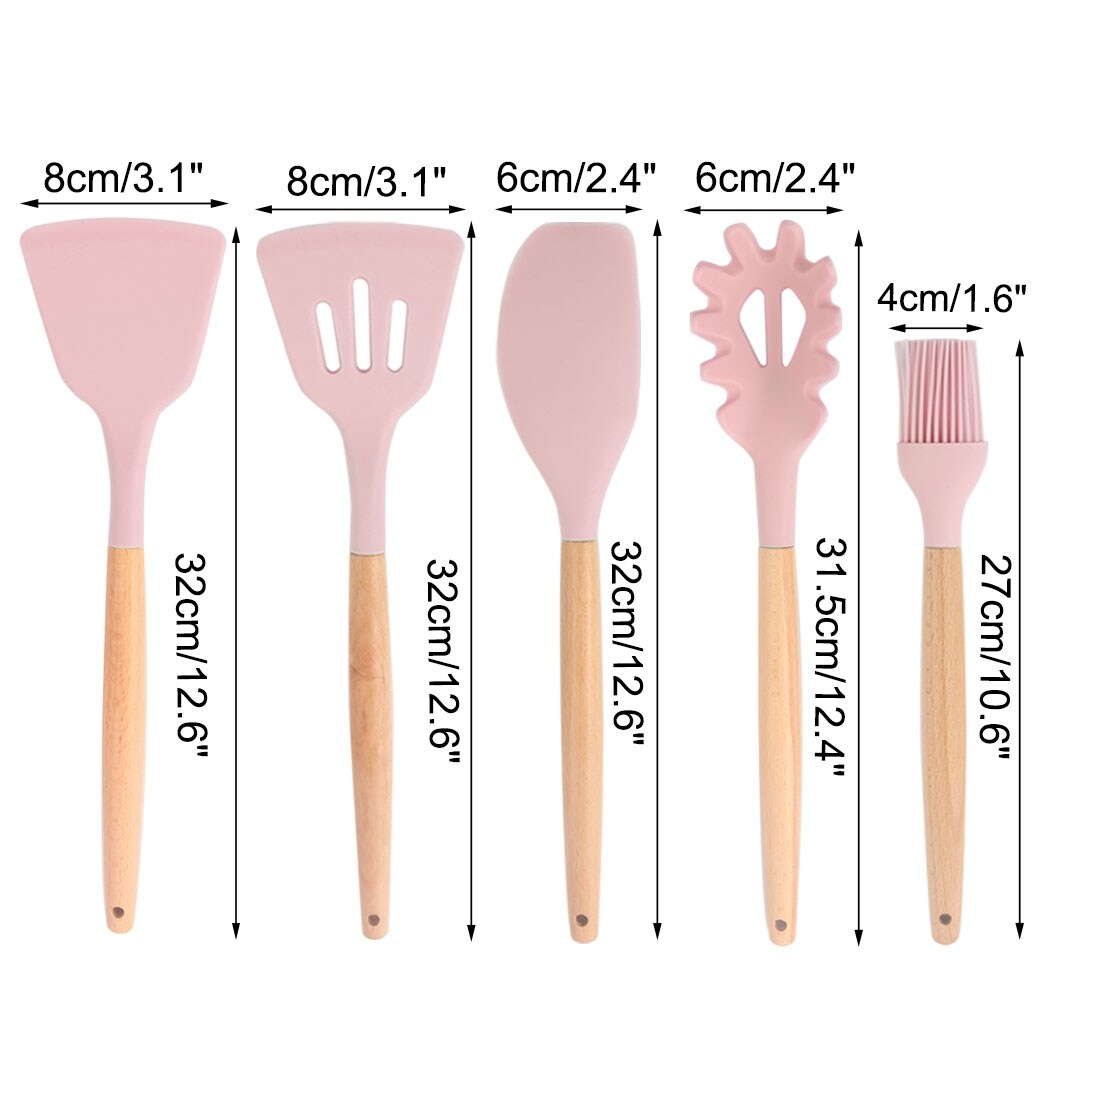 https://ak1.ostkcdn.com/images/products/is/images/direct/43aca00841f29f09c9f645aa65a3d60ffcdc384a/5pcs-Silicone-Spatula-Set-Heat-Resistant-Non-scratch-Kitchen-Cooking.jpg